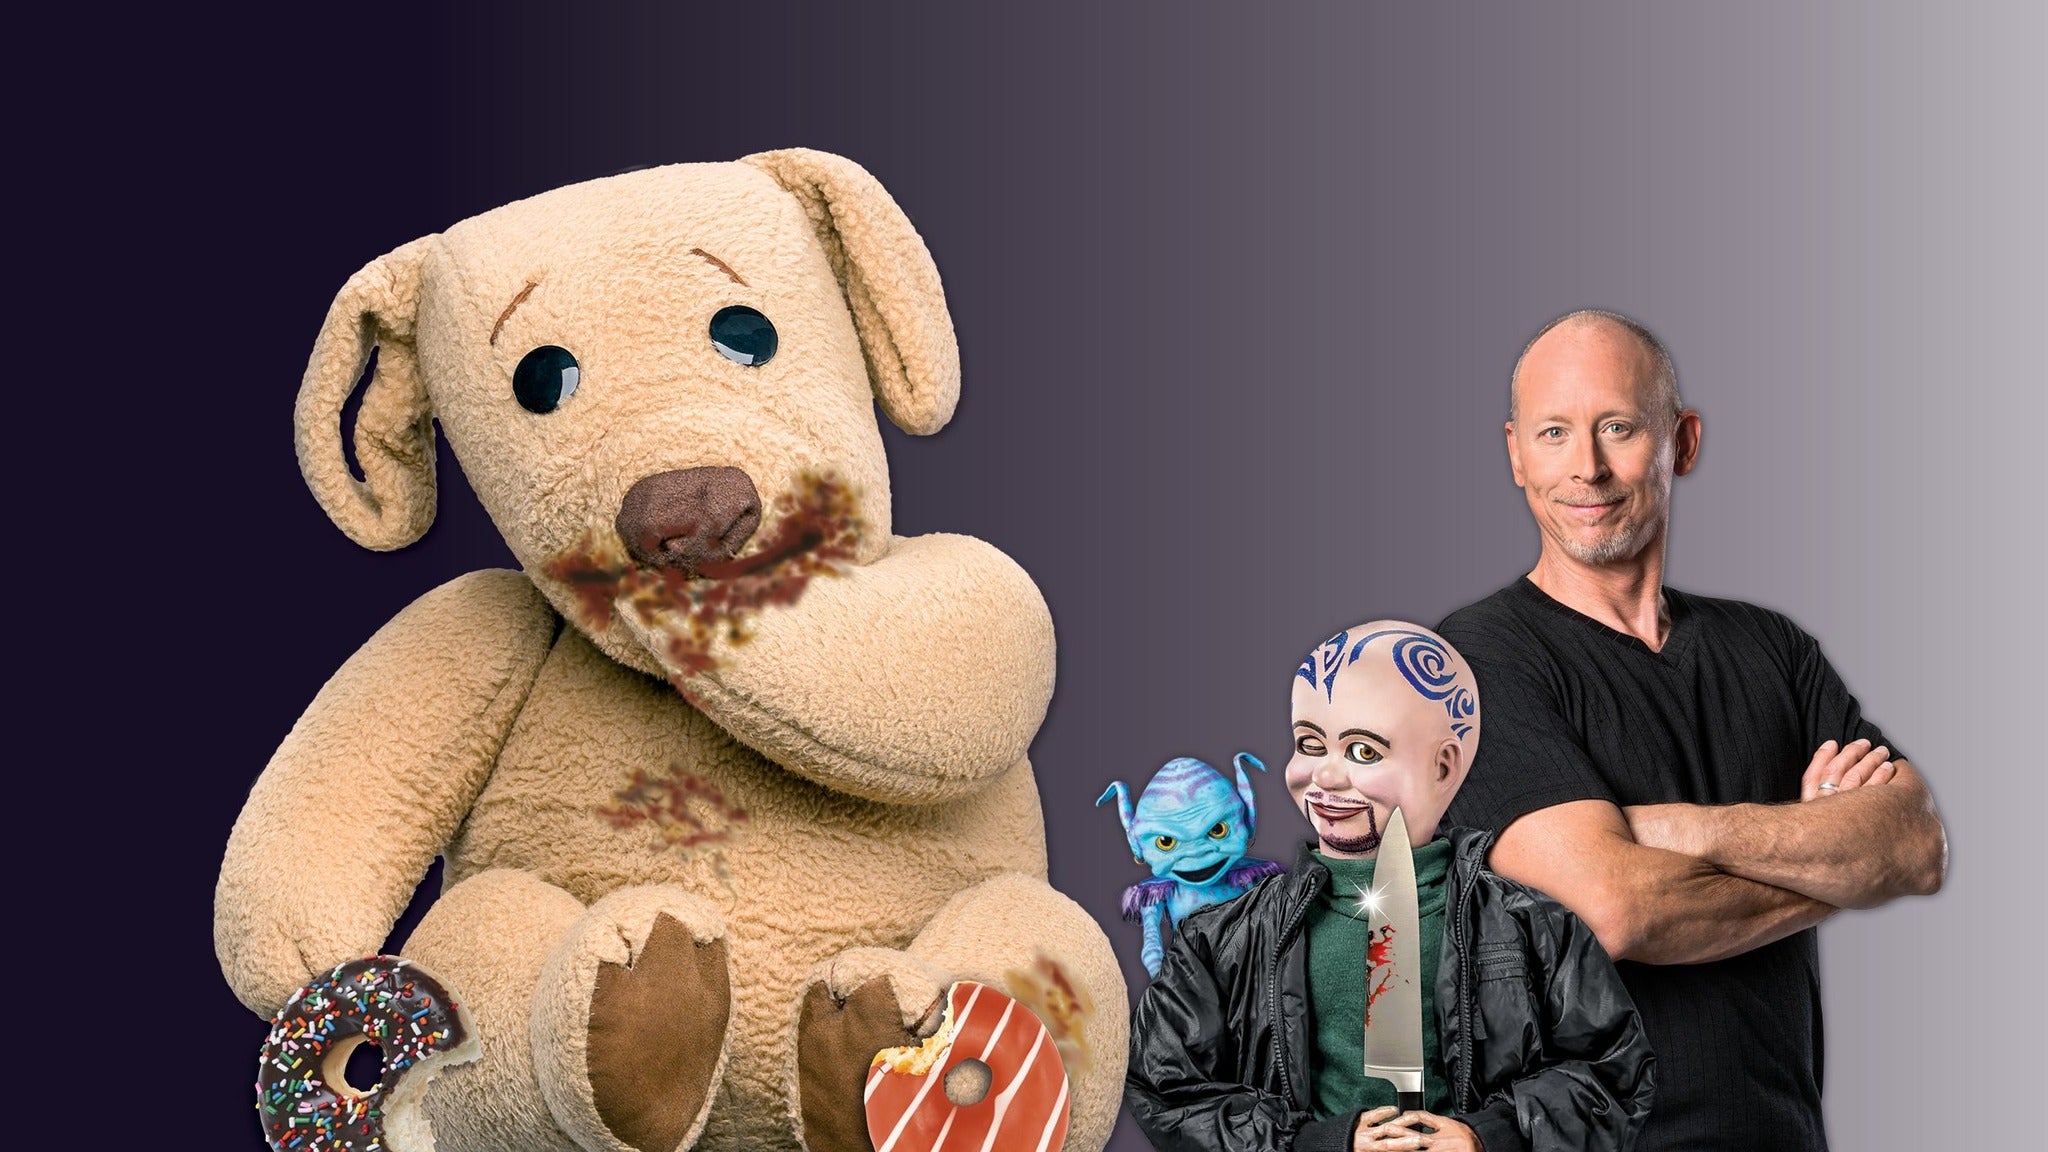 Image used with permission from Ticketmaster | David Strassman in the Chocolate Diet tickets